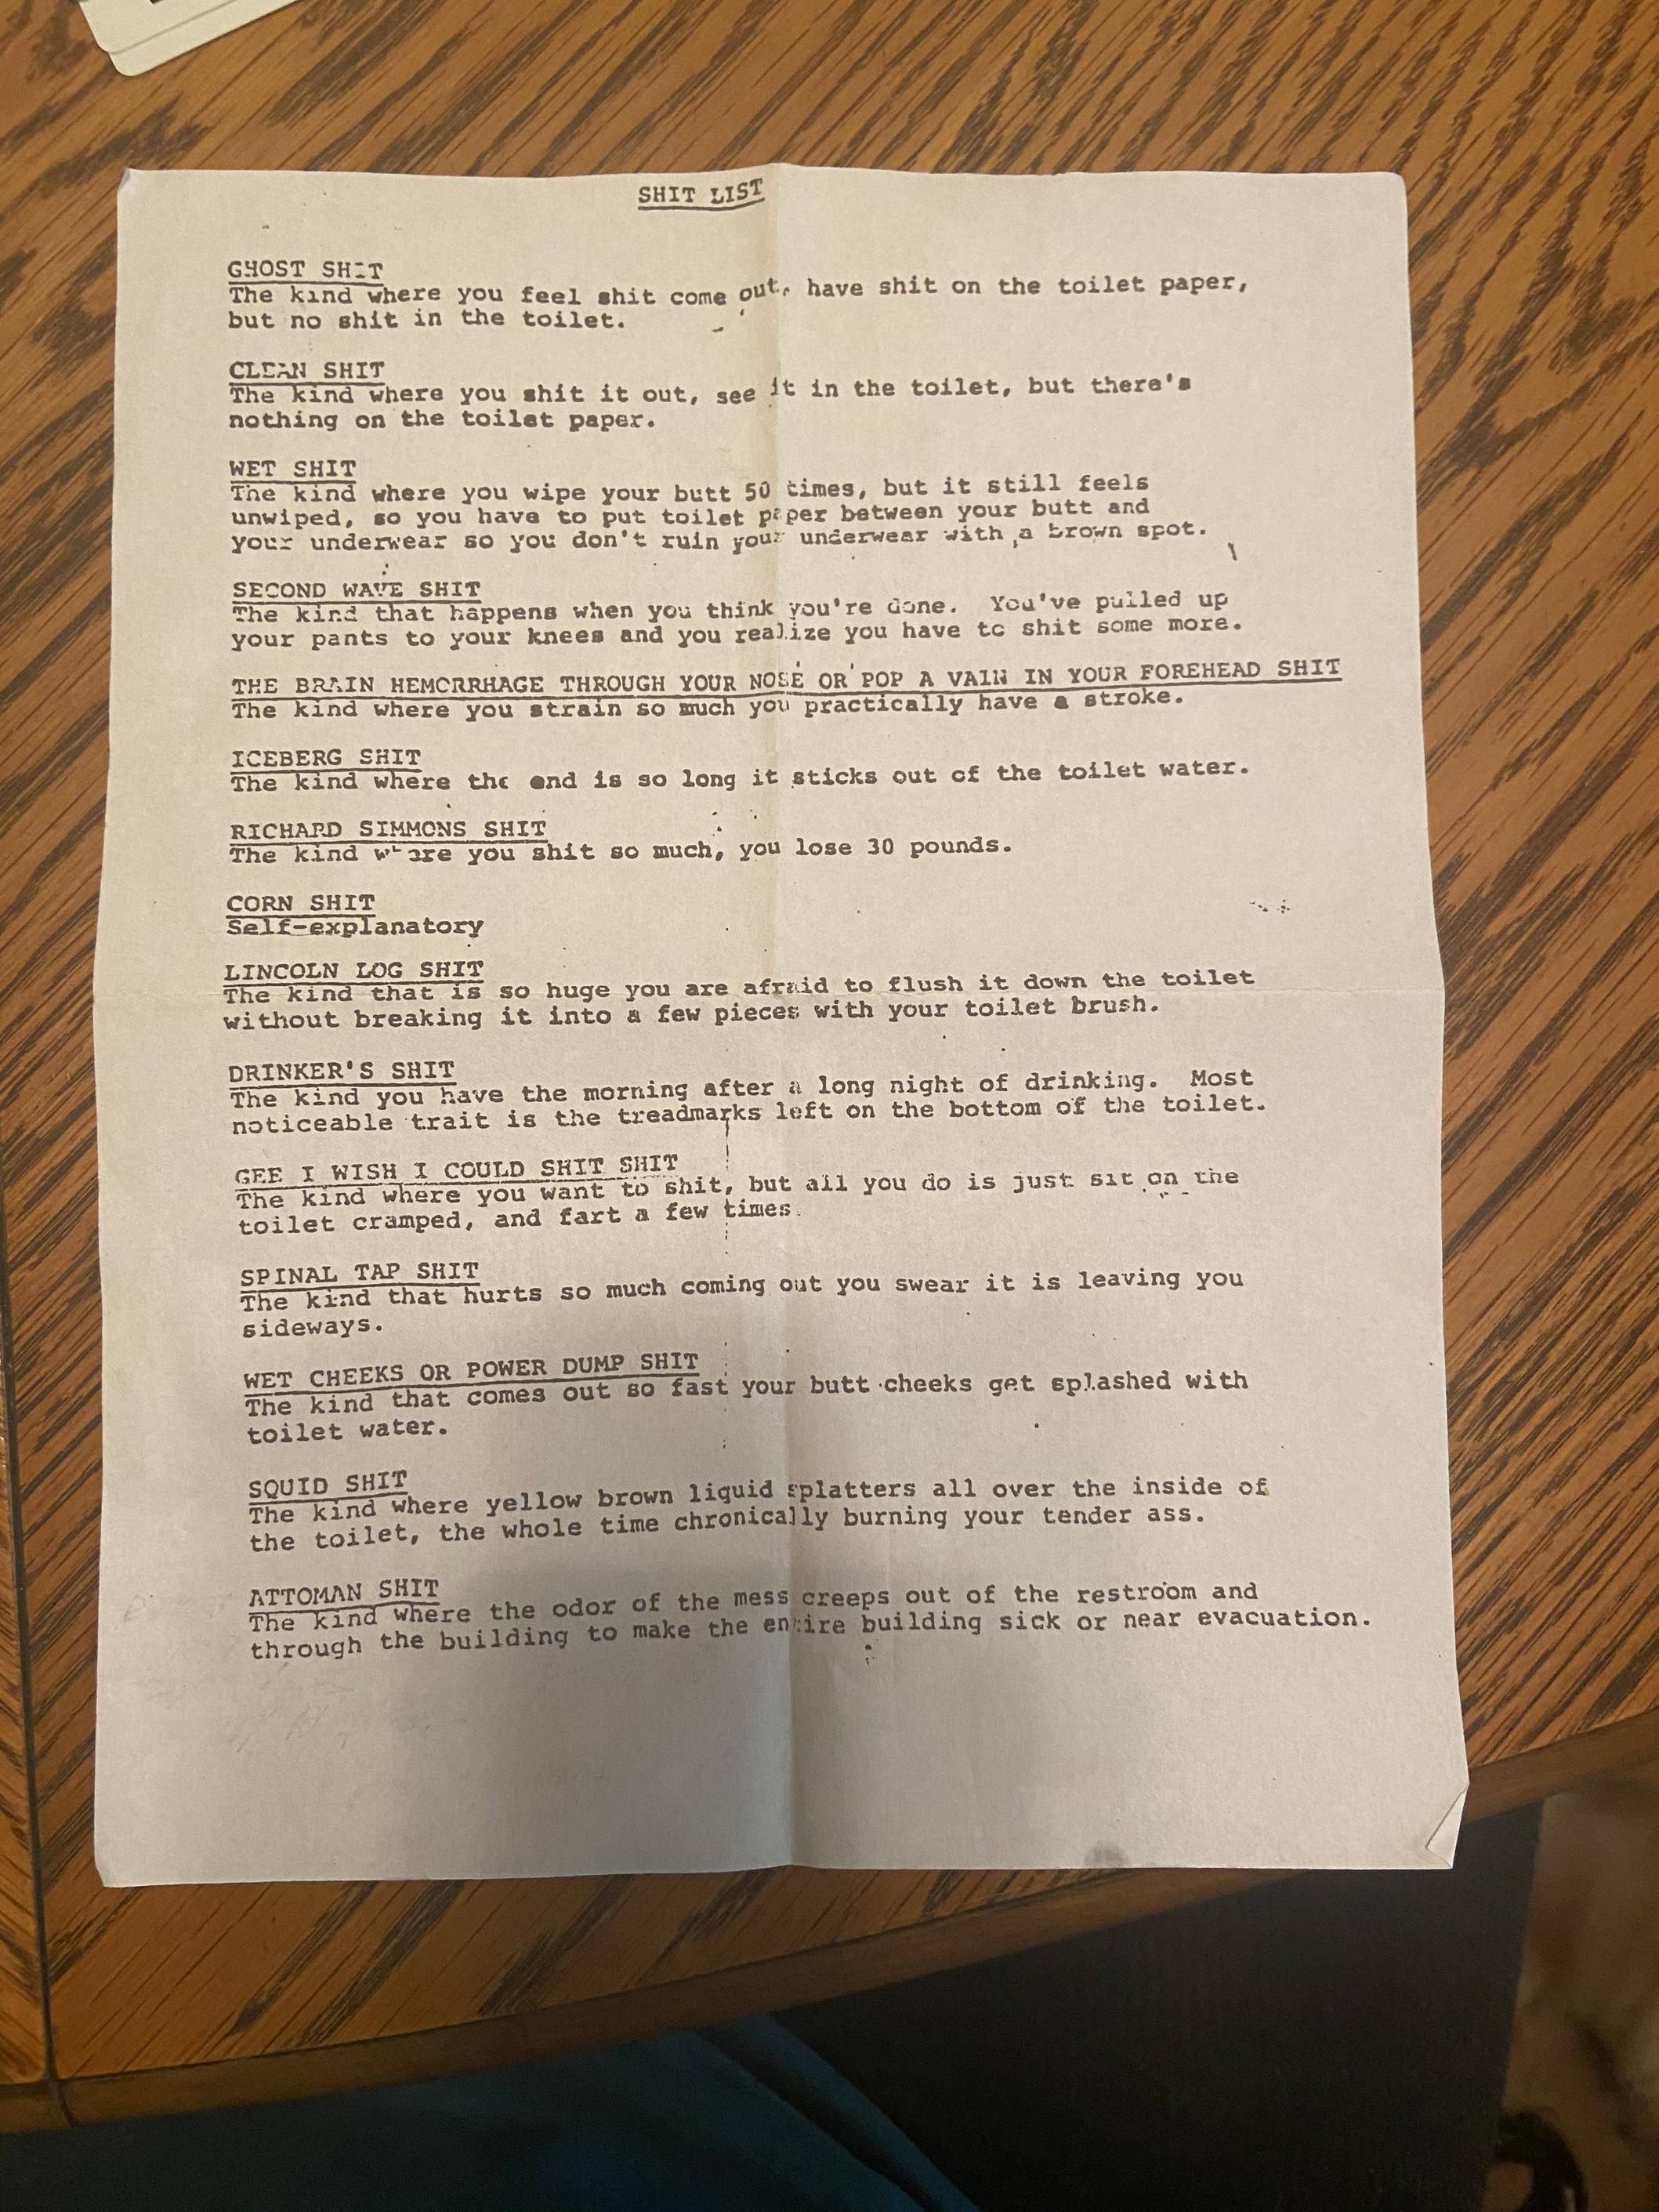 I was going through my grandpa’s things after he passed and found this... I thought I would share the laughs!